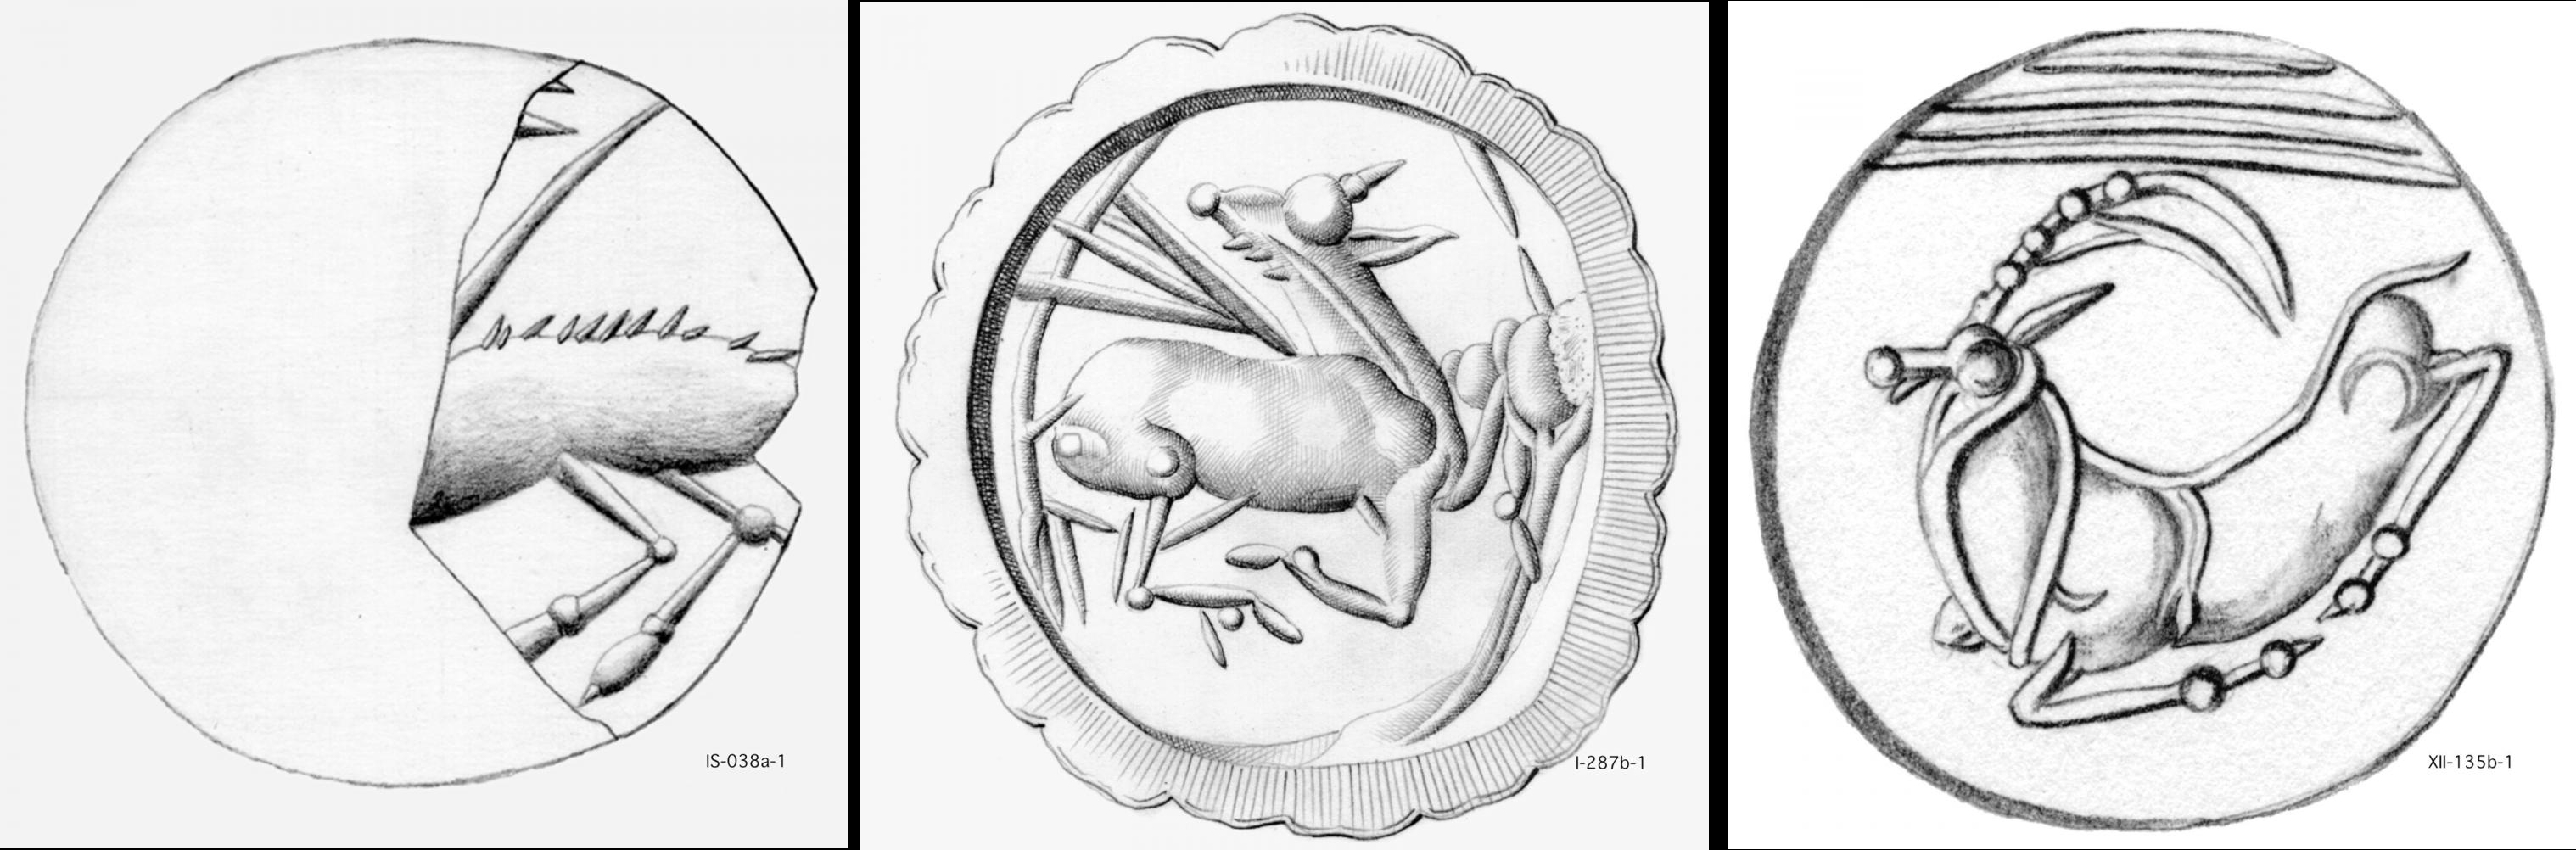 Fig. 2: A fragment of CMS IS
                           038a, the slightly damaged CMS I 287b, and the well preserved CMS XII 135b. The first seal
                           side depicts either a bovine or a goat, while the others show a goat. [Graphic by courtesy of the CMS Heidelberg.]